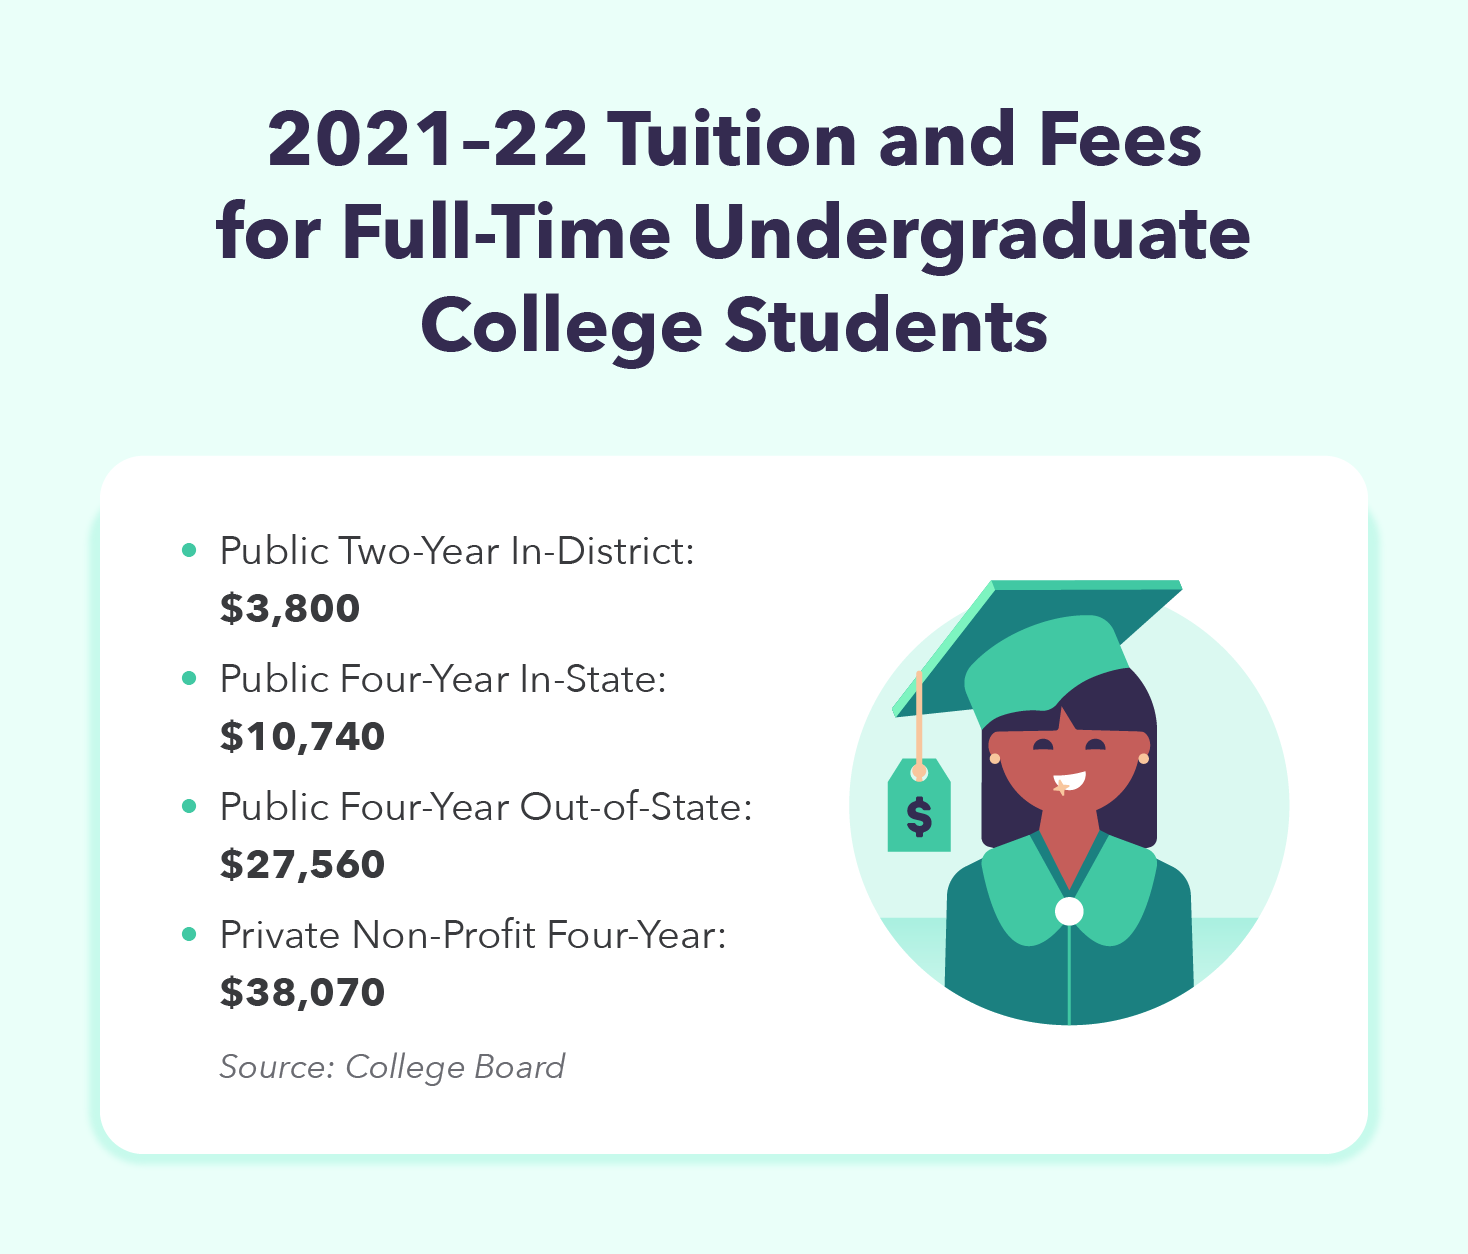 Tuition-and-fees for full-time undergraduate students